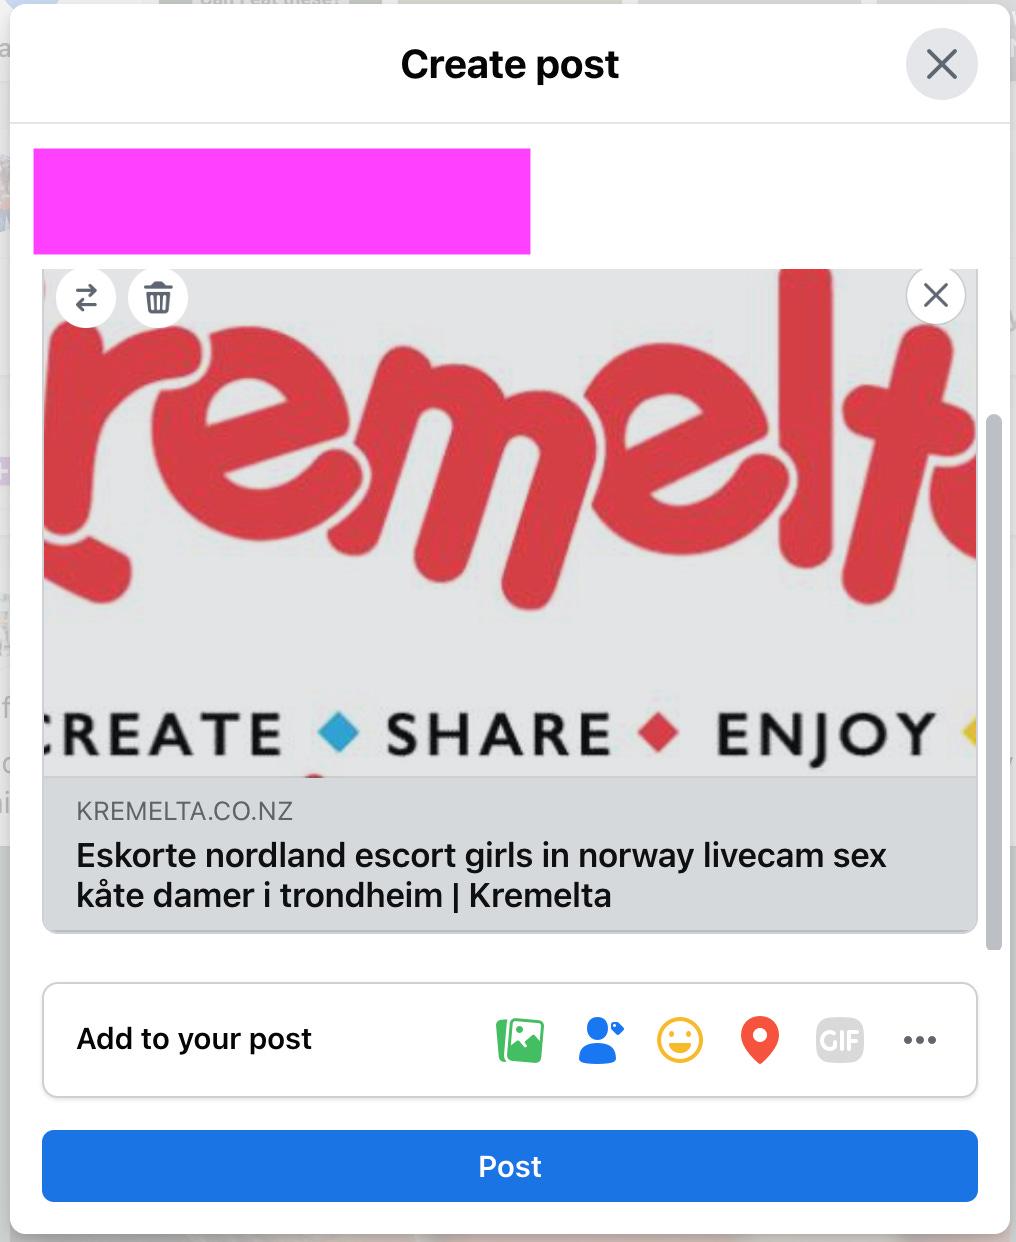 Sharing a post on Facebook just shares porno text!